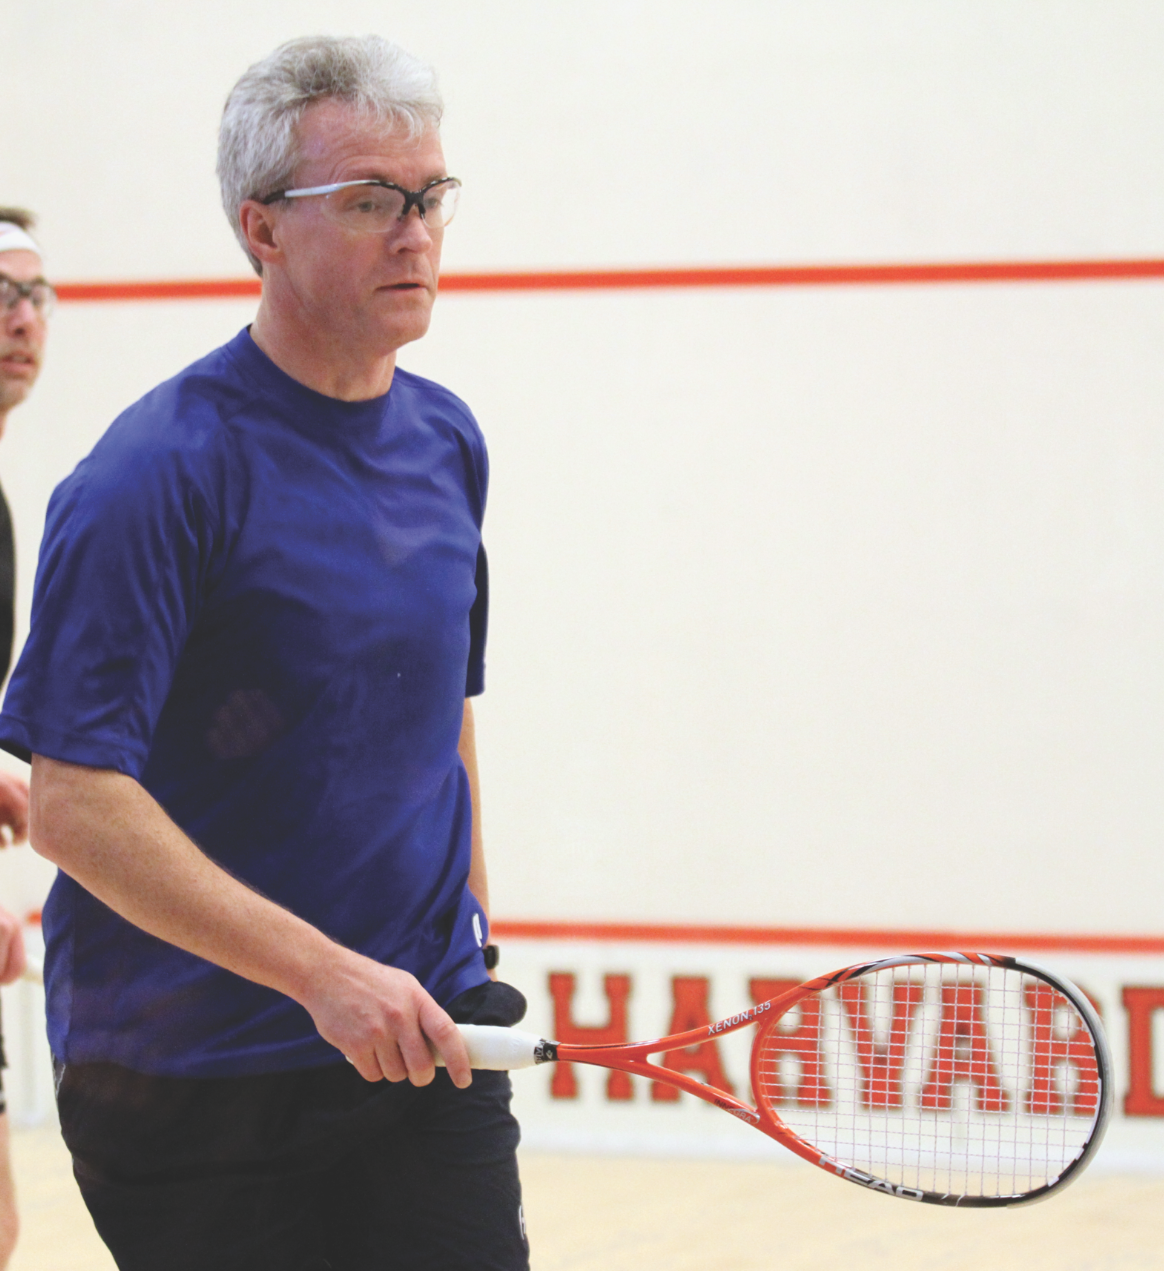 In the Men’s 50+, first-timer Dominic Hughes met little resistance on his way to the championship, but Mark Reed held his own in the opening game of the final before falling in three. 